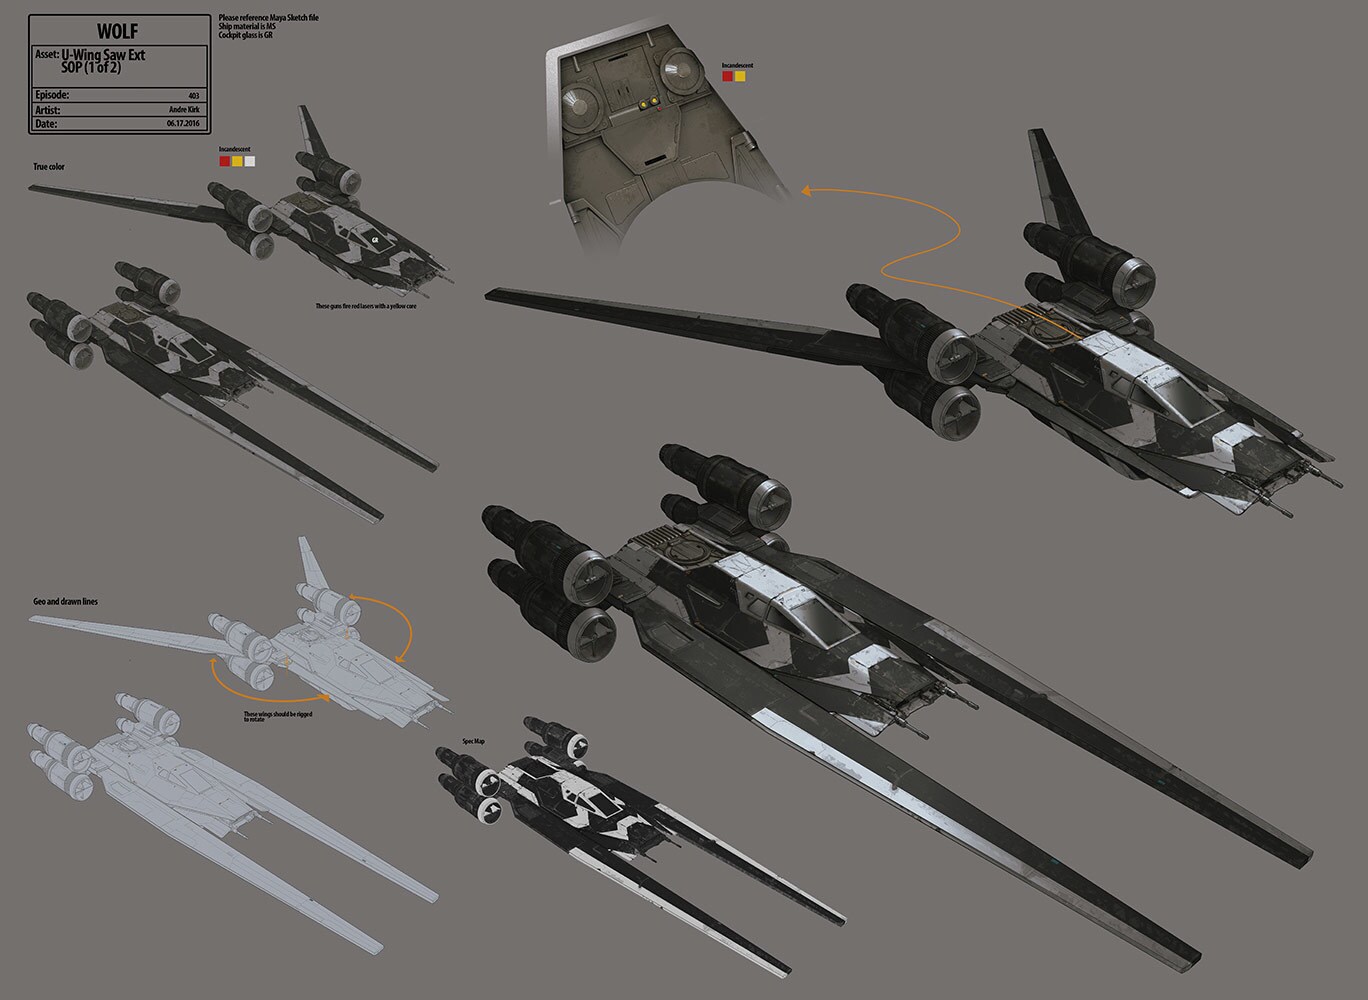 U-wing Saw ext. concept art by Andre Kirk.